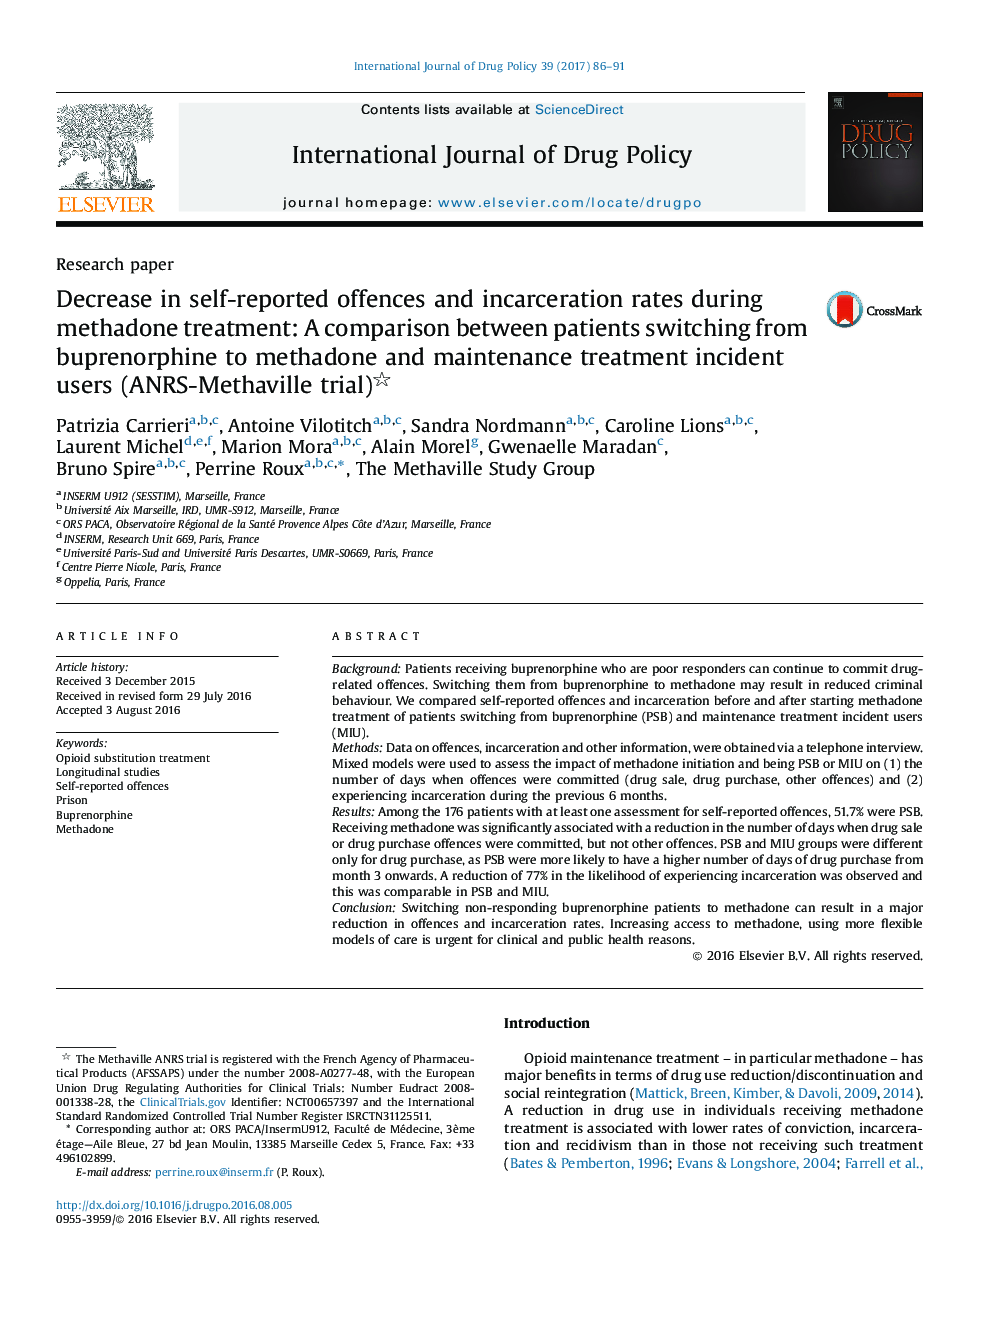 Decrease in self-reported offences and incarceration rates during methadone treatment: A comparison between patients switching from buprenorphine to methadone and maintenance treatment incident users (ANRS-Methaville trial)